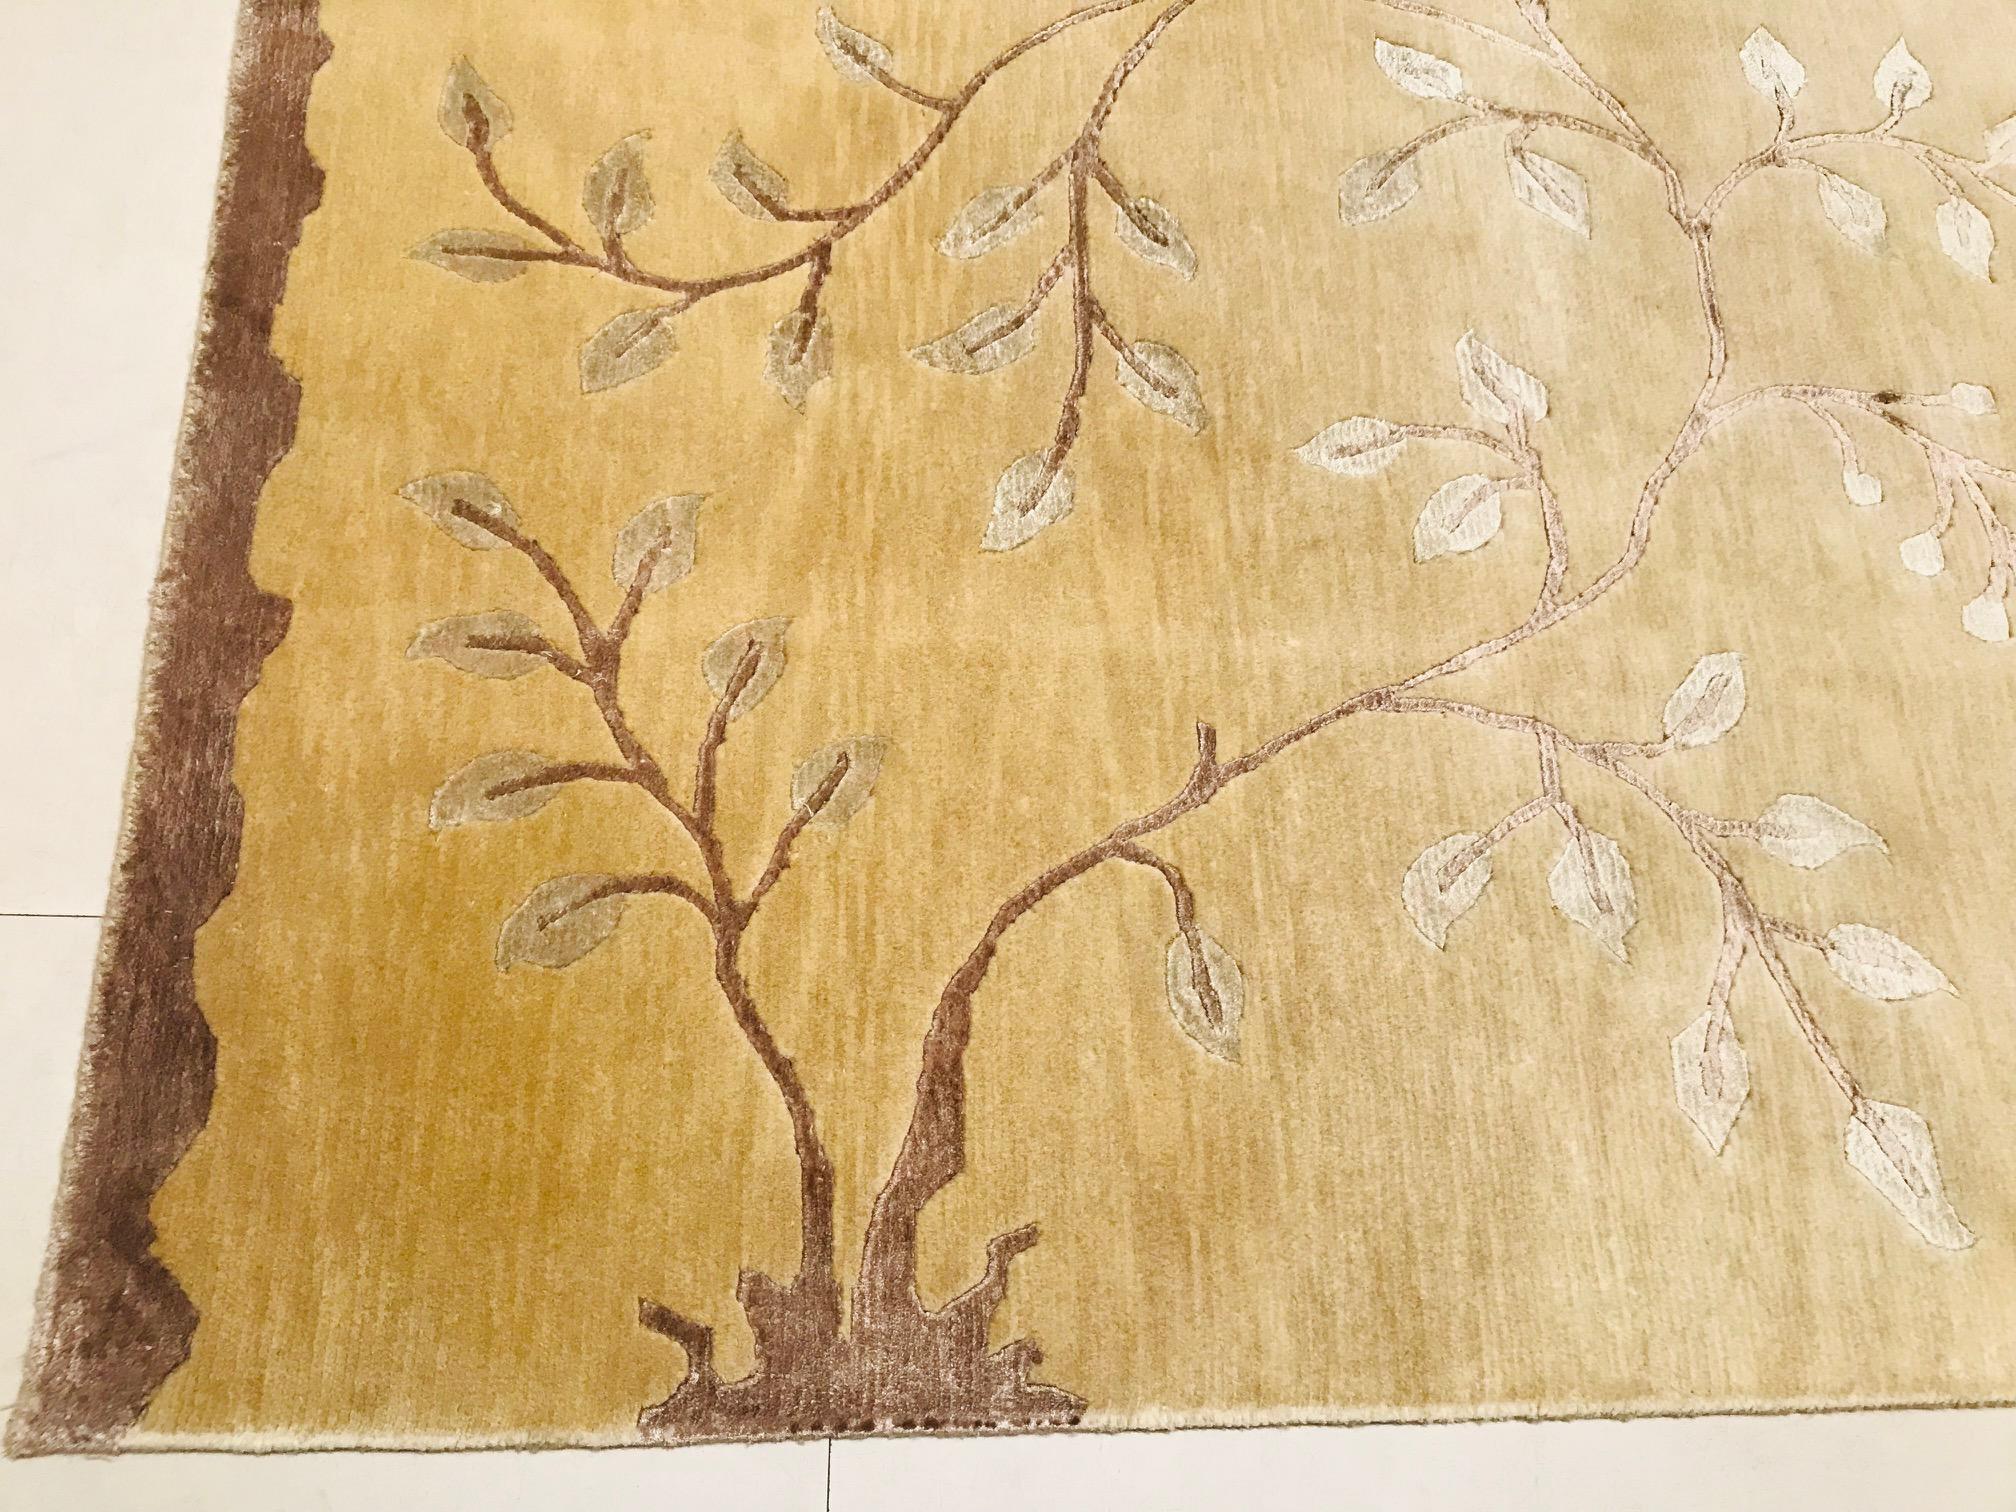 Late 20th Century Indian Wool Rug Hand Knotted in Yellow with Brown Branches  In Excellent Condition For Sale In Valencia, Spain